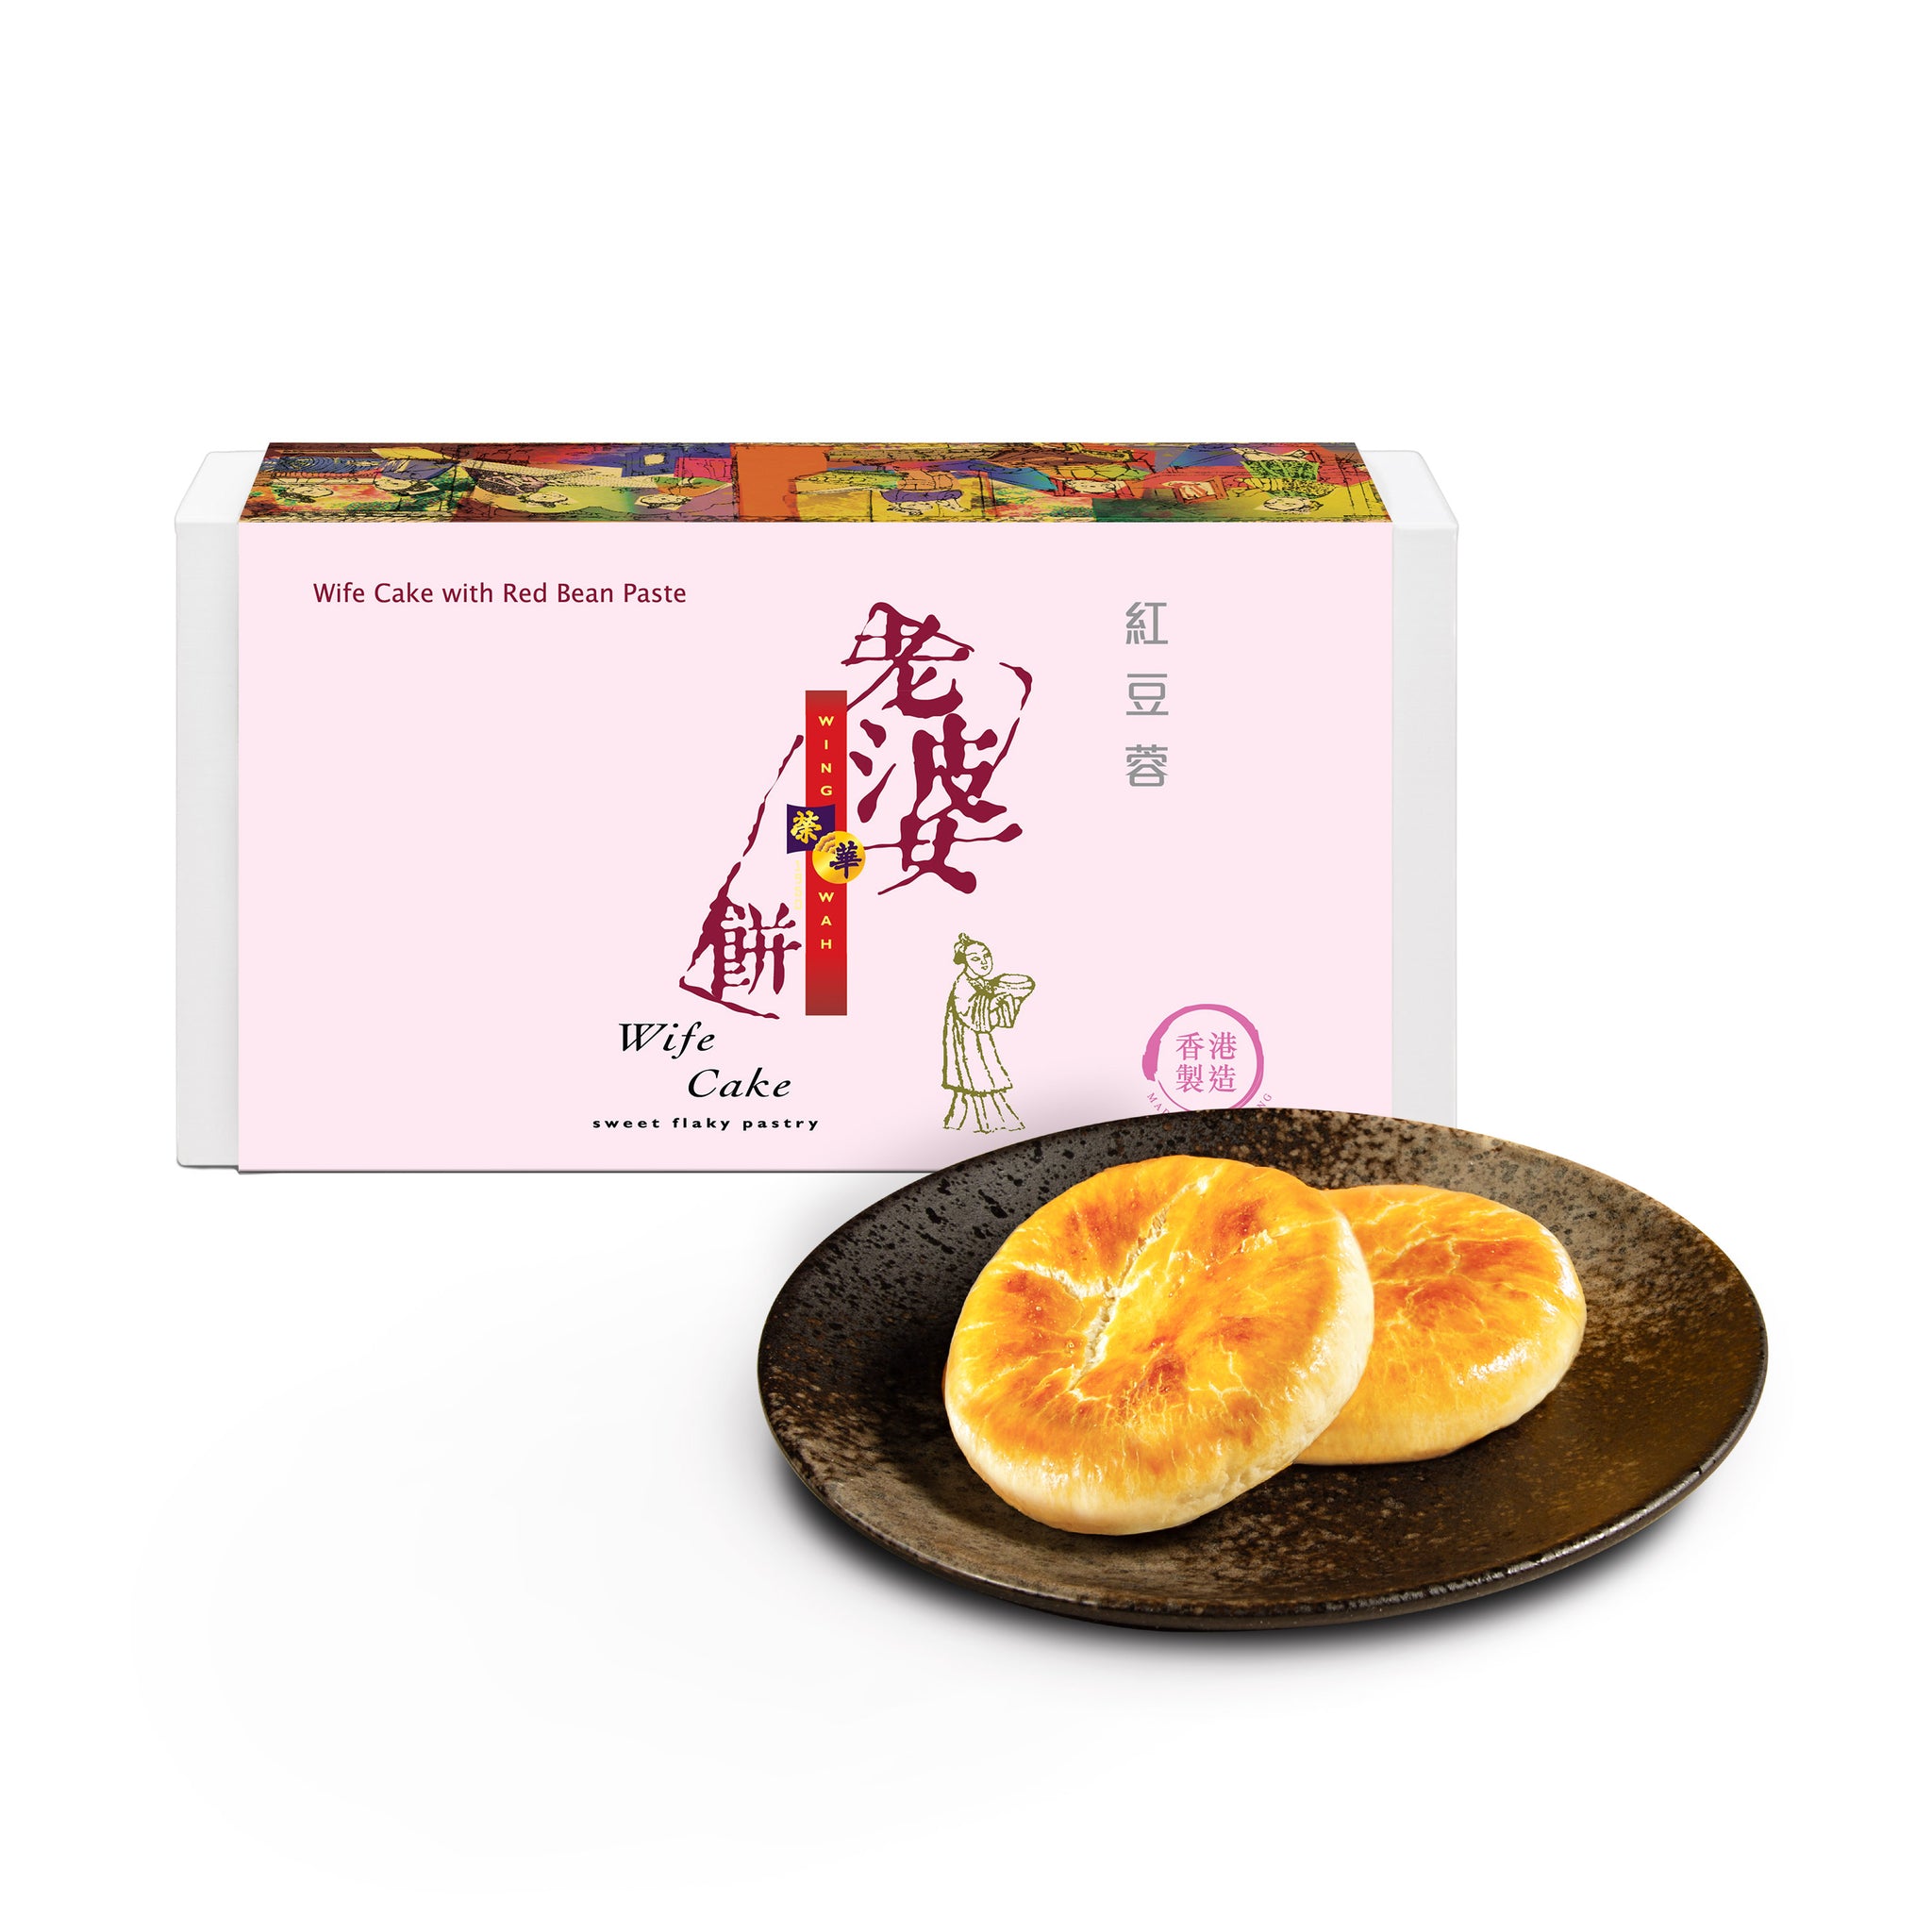 WING WAH Wife Cake with Red Bean Paste sweet flaky pastry (6pcs) 榮華 紅豆沙老婆餅（6件裝）( 獨立包裝 )